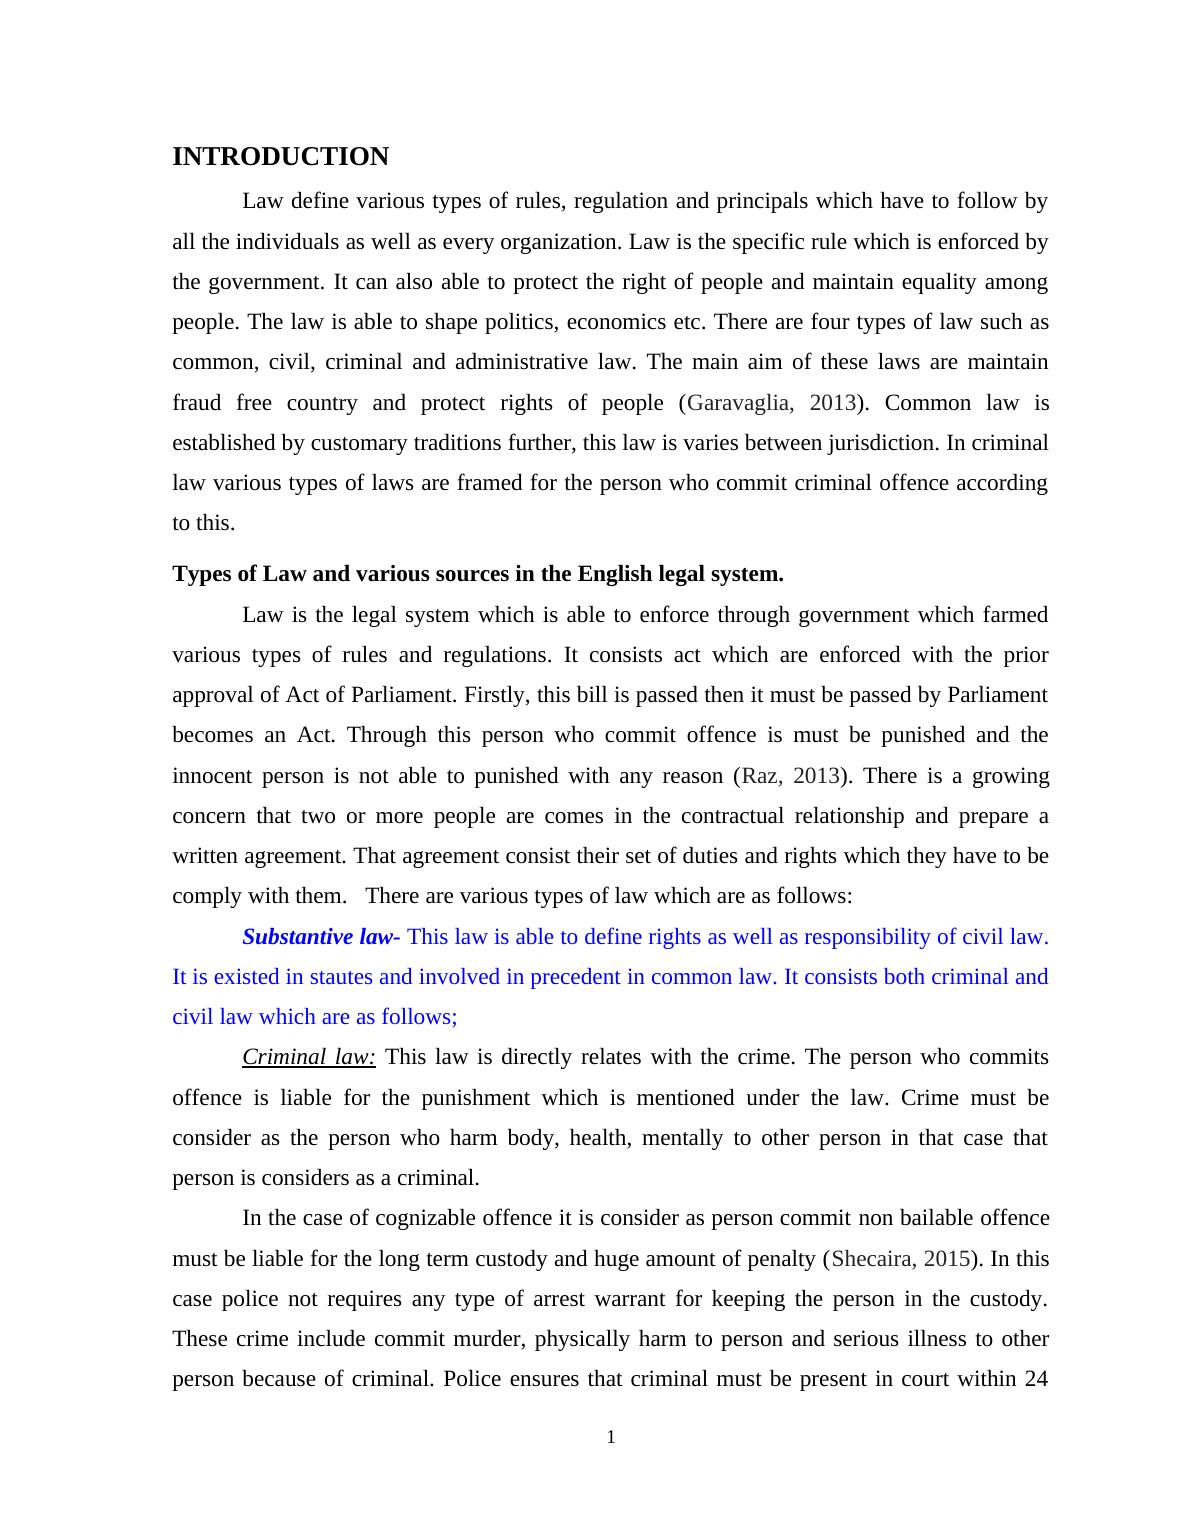 Assignment: English Legal System_3